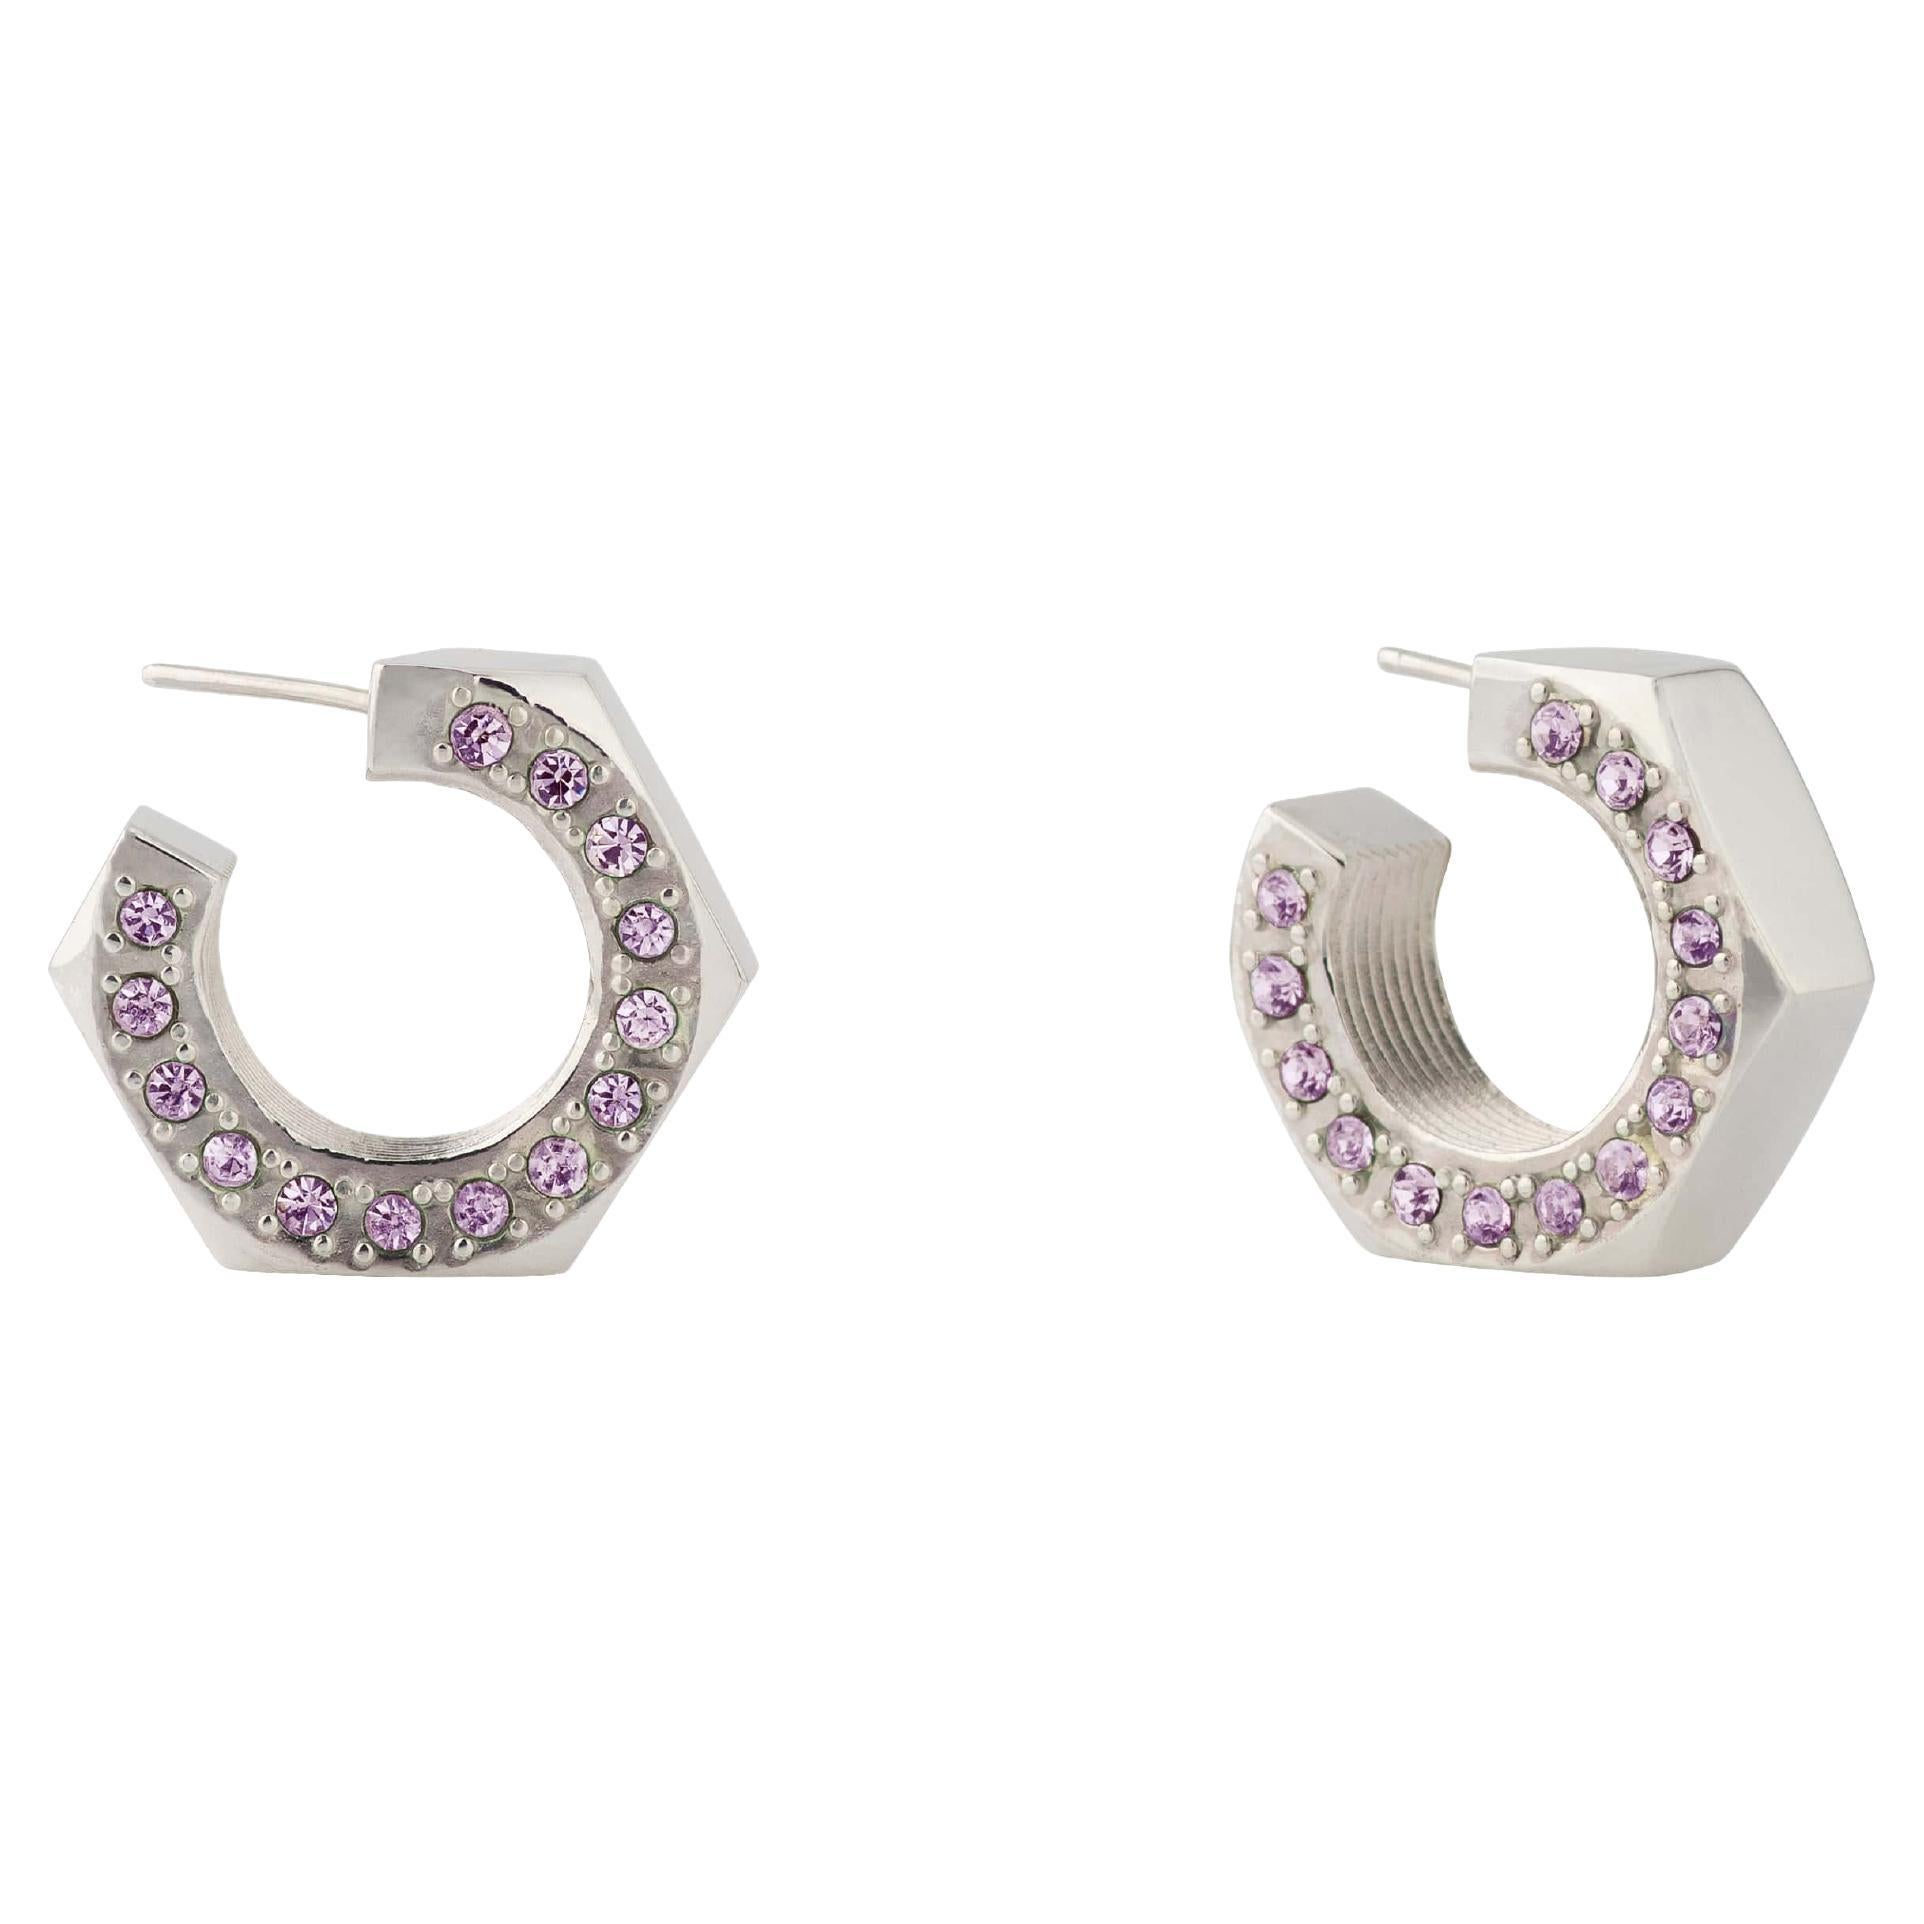 Big Sterling Silver Hoop Earrings with Natural Amethyst Stones on the Side For Sale